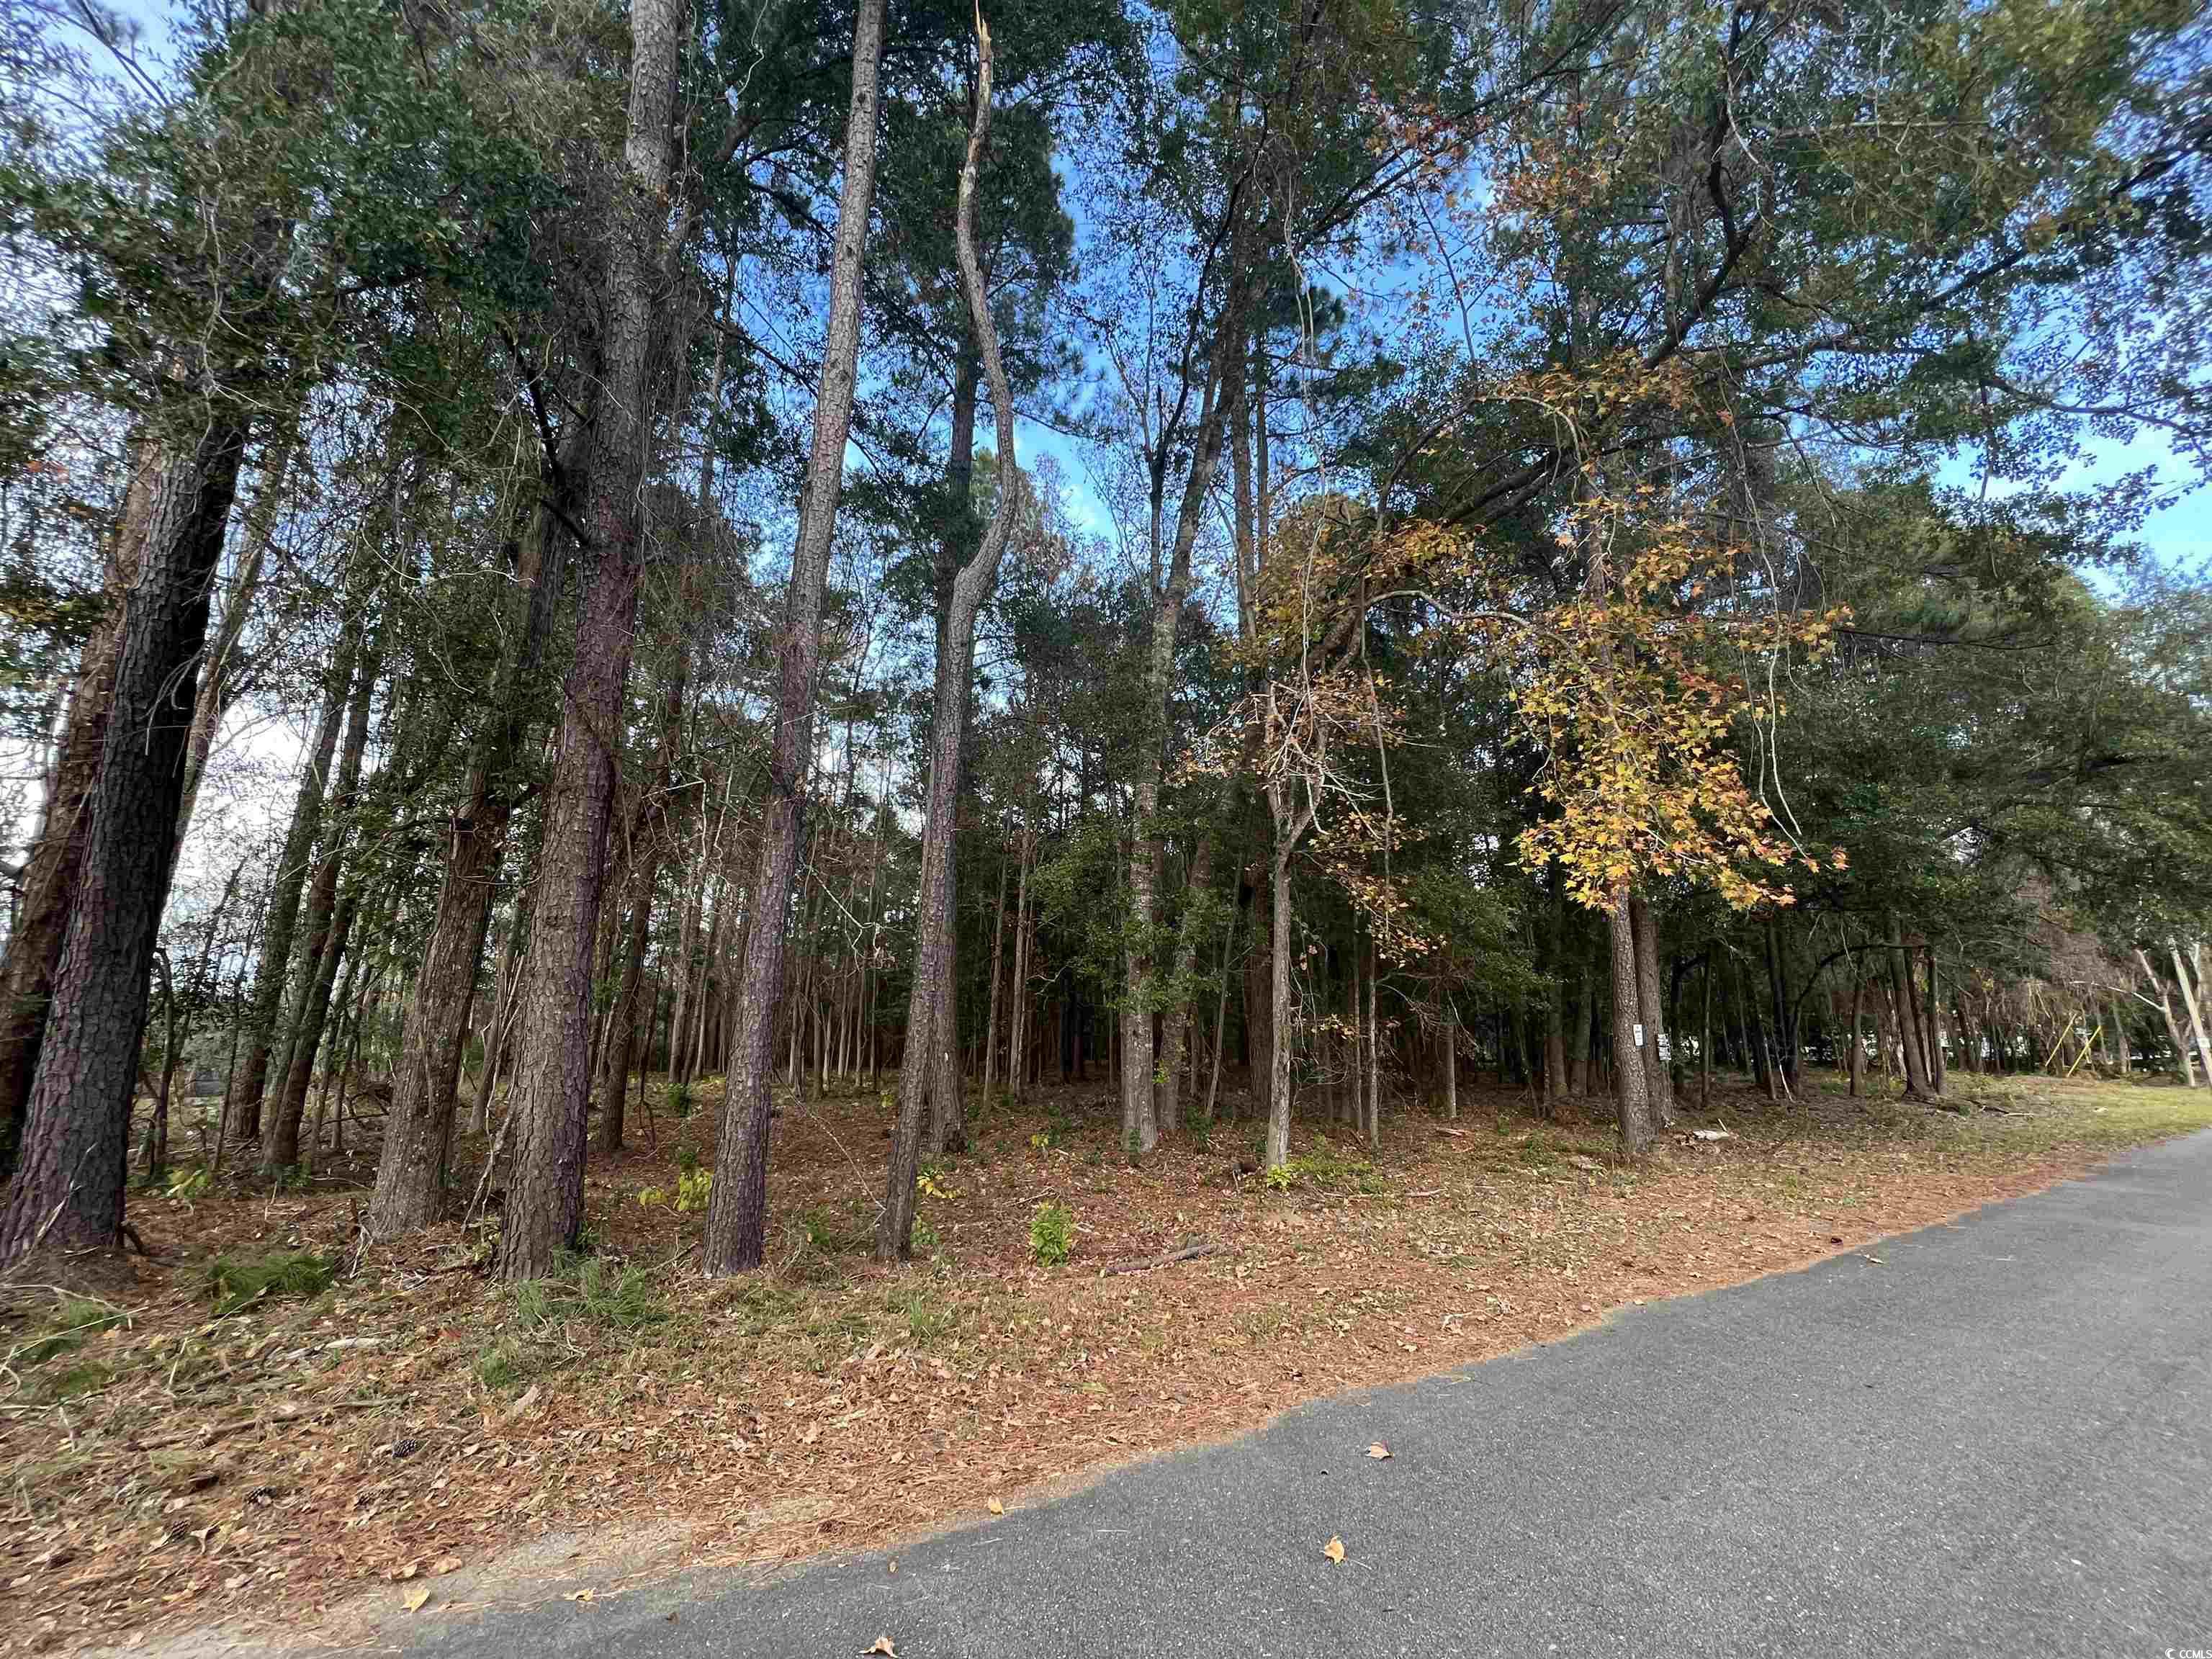 welcome to lot #15 on comanche drive.  this lot is unique because of its deeded private access to a boat landing accessing deep waters of the beautiful black river.  the landing is across the street from the lot and in short walking distance on a fenced in 1 acre river lot located between lots 5 and 6. the right to have access to the boat landing transfers with ownership and is perpetual and non-exclusive. the lot is approximately.87 of an acre and wooded with several oaks and many pines. it has recently been under brushed and is an easy walk through for viewing. the public browns ferry landing is less than a mile away and downtown georgetown is a short 20 minute drive by car. leave by boat and head towards winyah bay to fish for the big reds or pull into the beautiful historic district of georgeown to shop and dine. myrtle beach and charleston are both approximately 60 miles away.   **street has access to county water. ** **no trailers/campers are allowed on this street."** **lot size is approximate and                                                  must be verified by the buyer.** **said easement is expressly limited to the launching and retrieving of watercraft.**